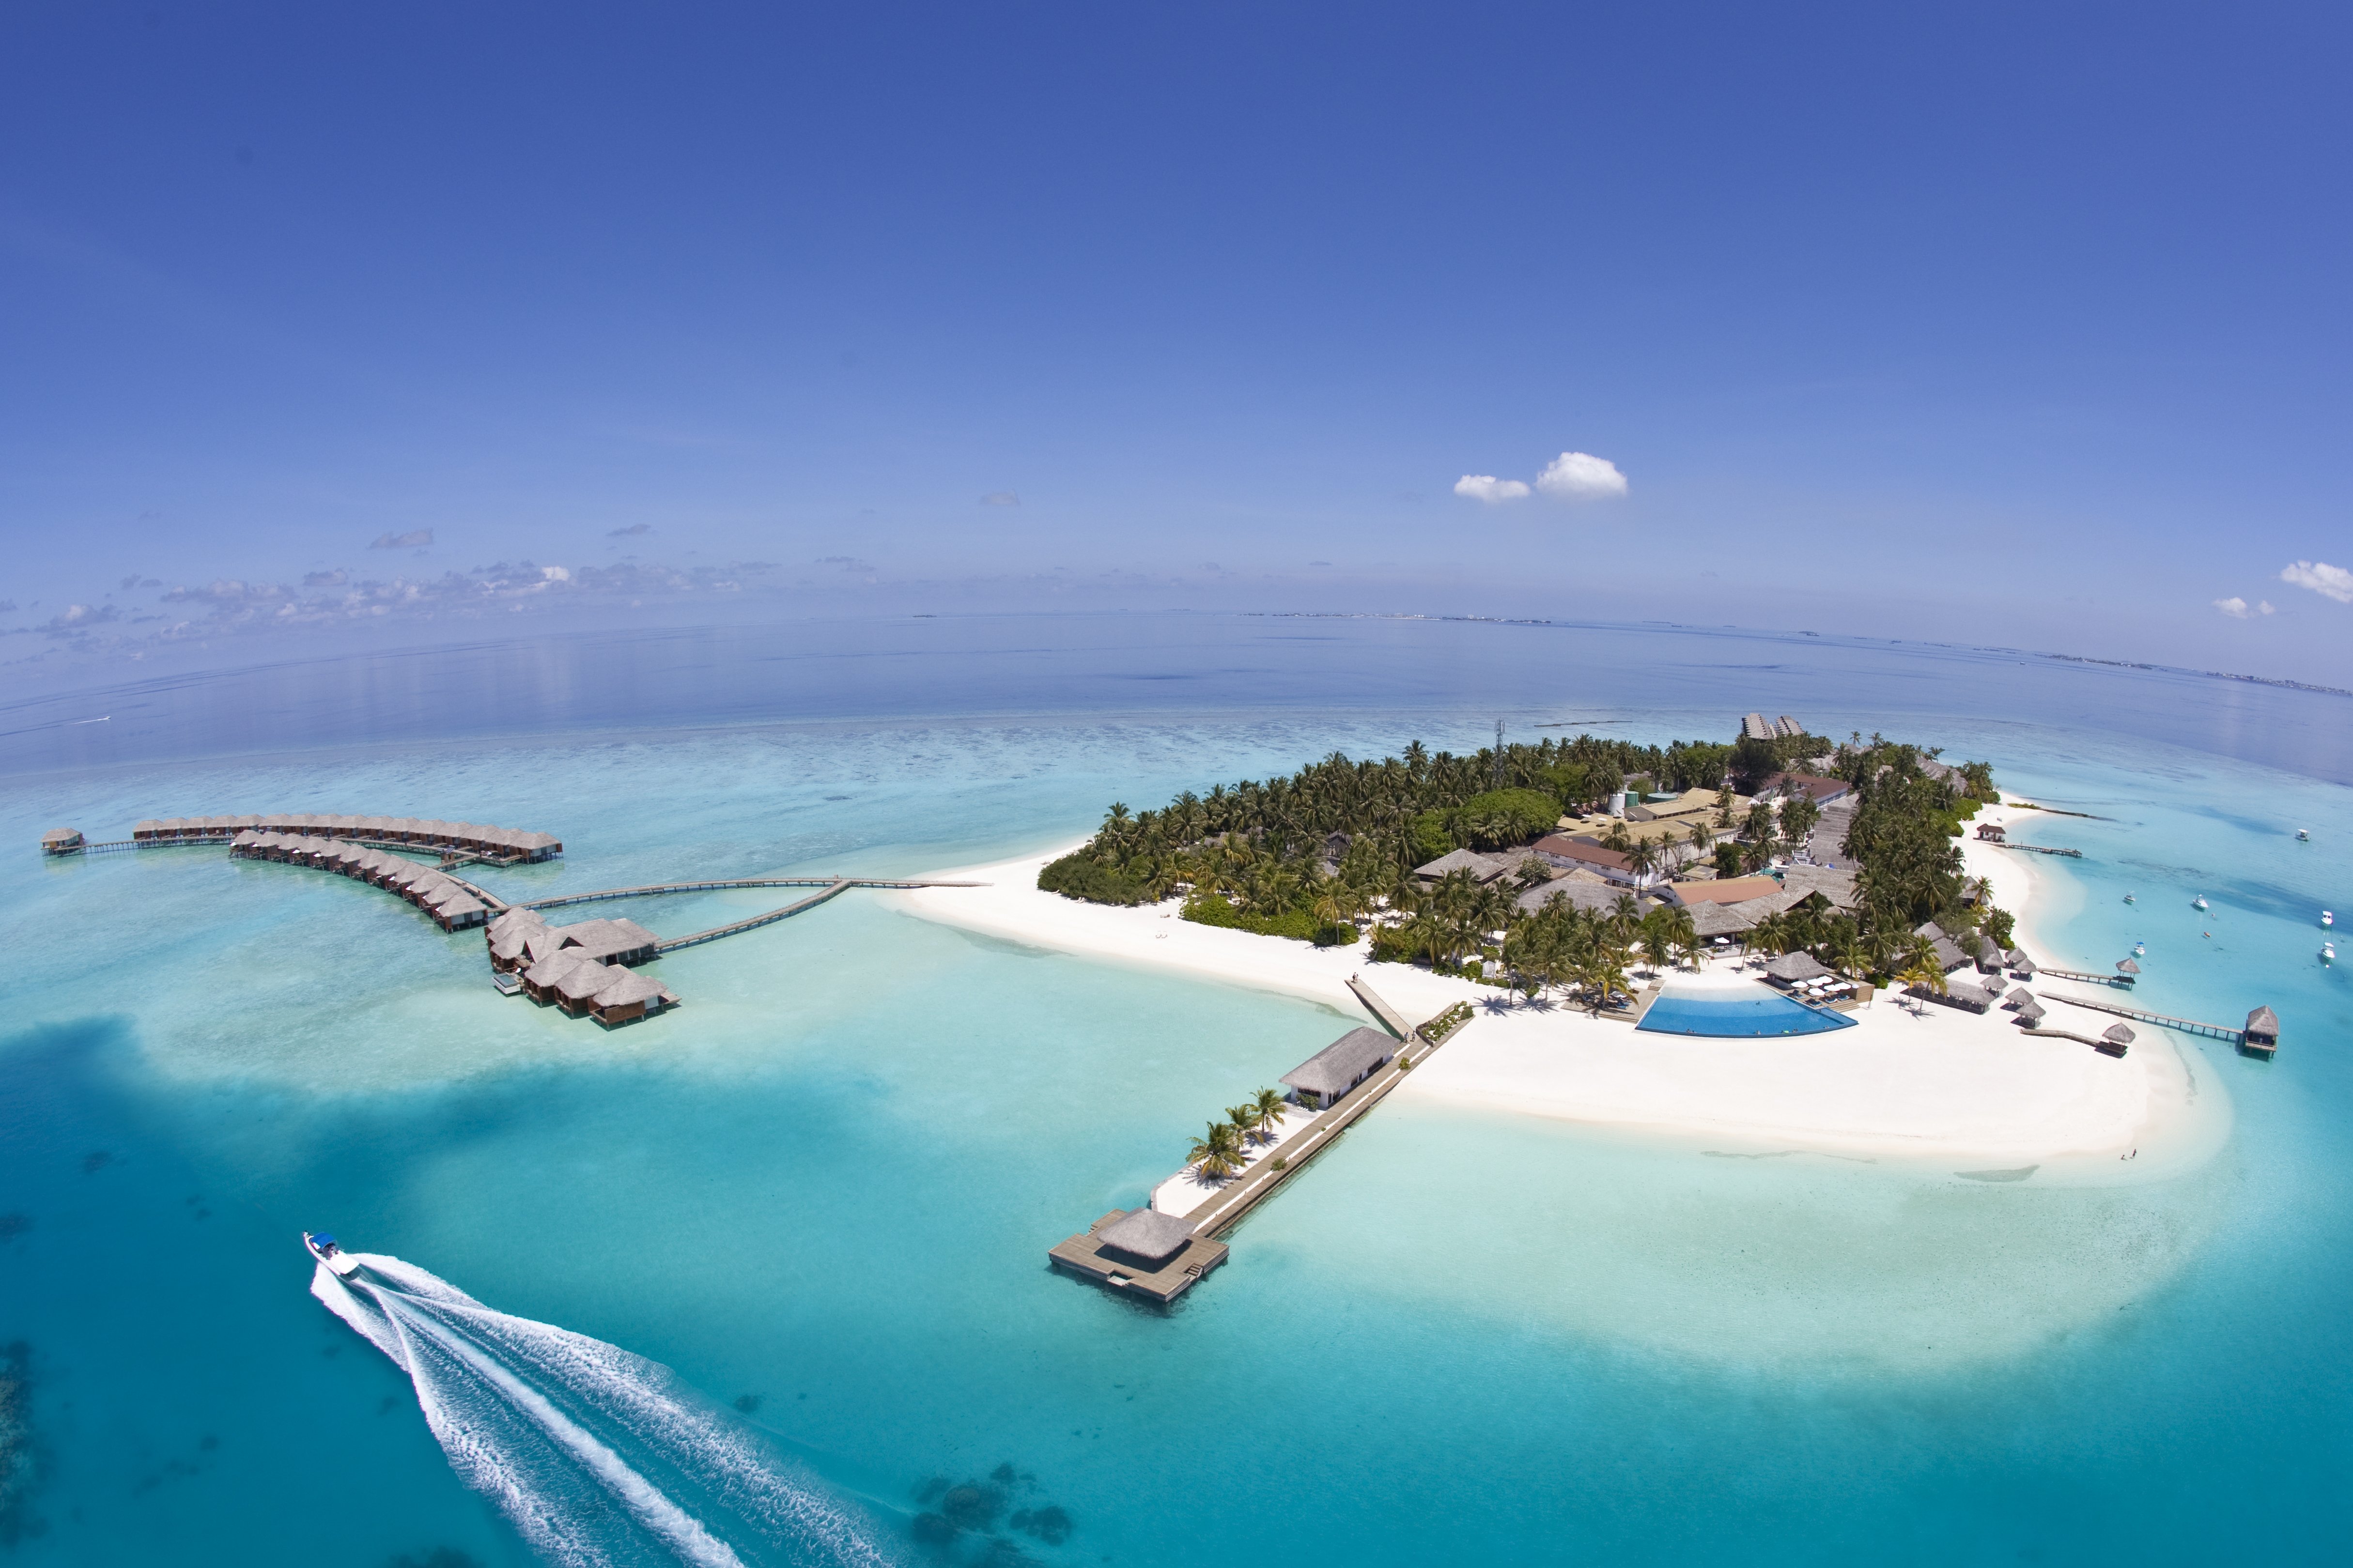 maldives, nature, land, height, relaxation, rest, island, paradise, resort, blue water, seychelles, relax